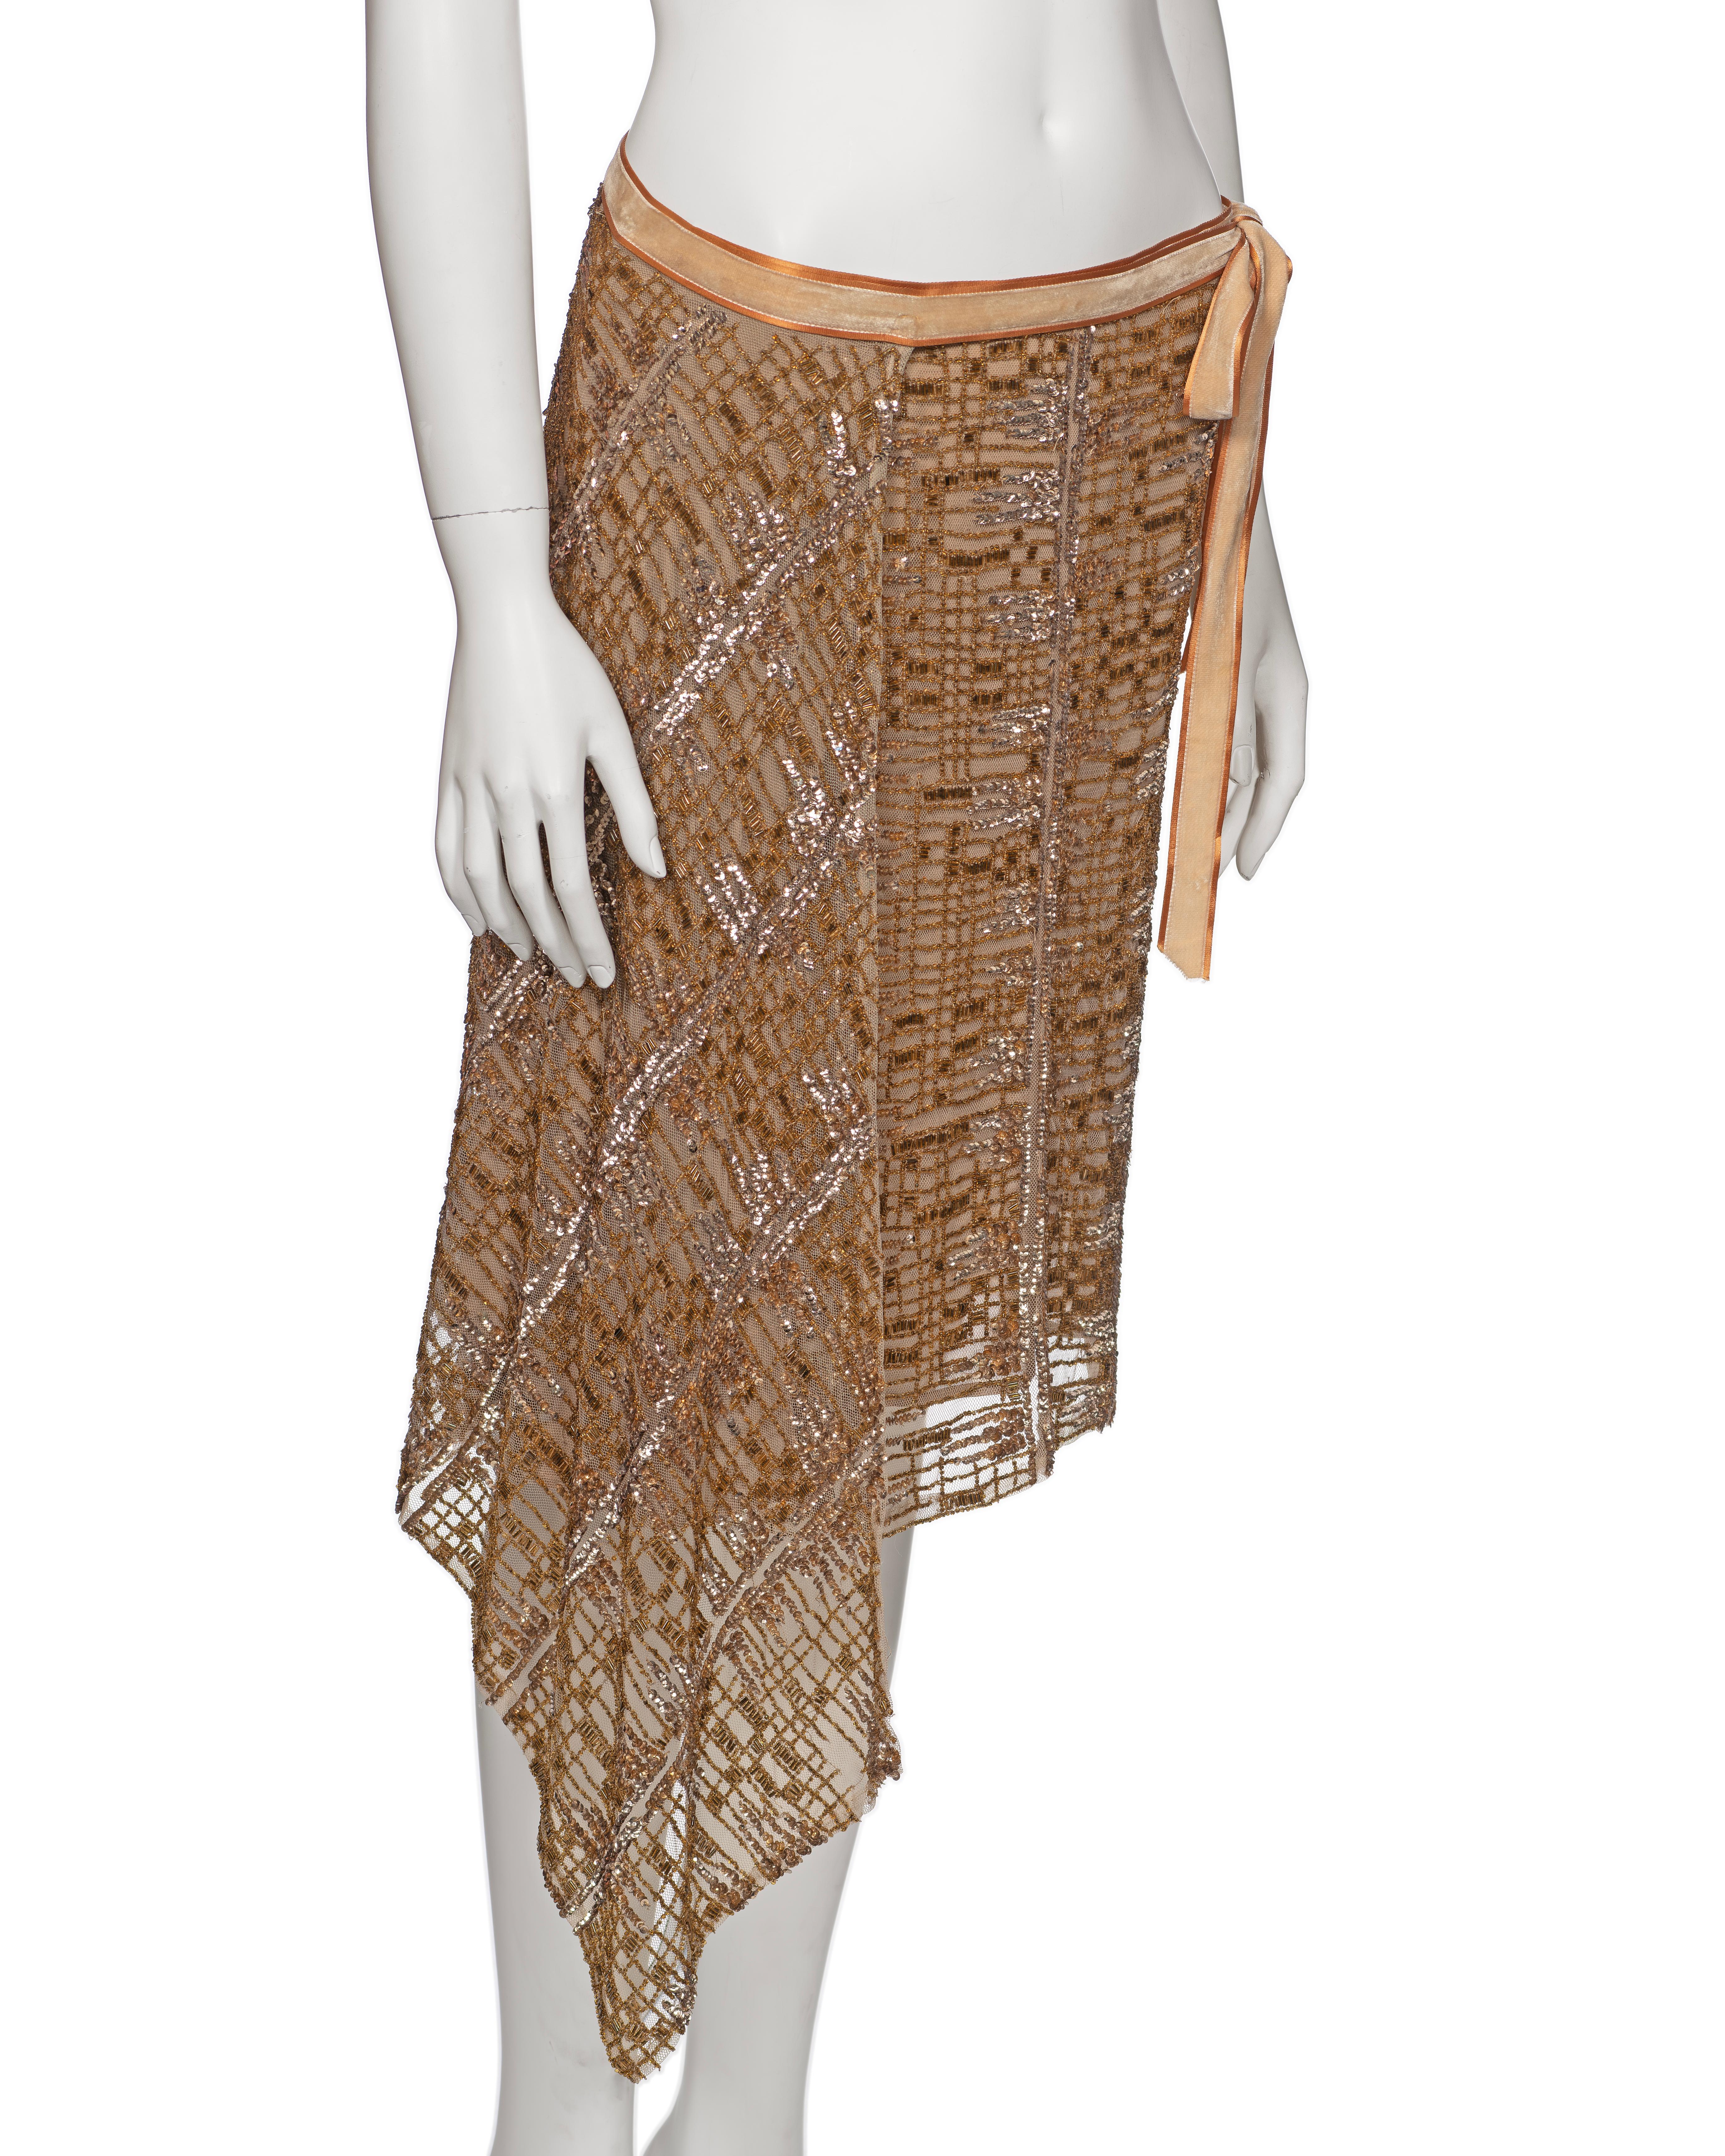 Blumarine by Anna Molinari Copper Beaded and Sequin Mesh Wrap Skirt, FW 2001 For Sale 2